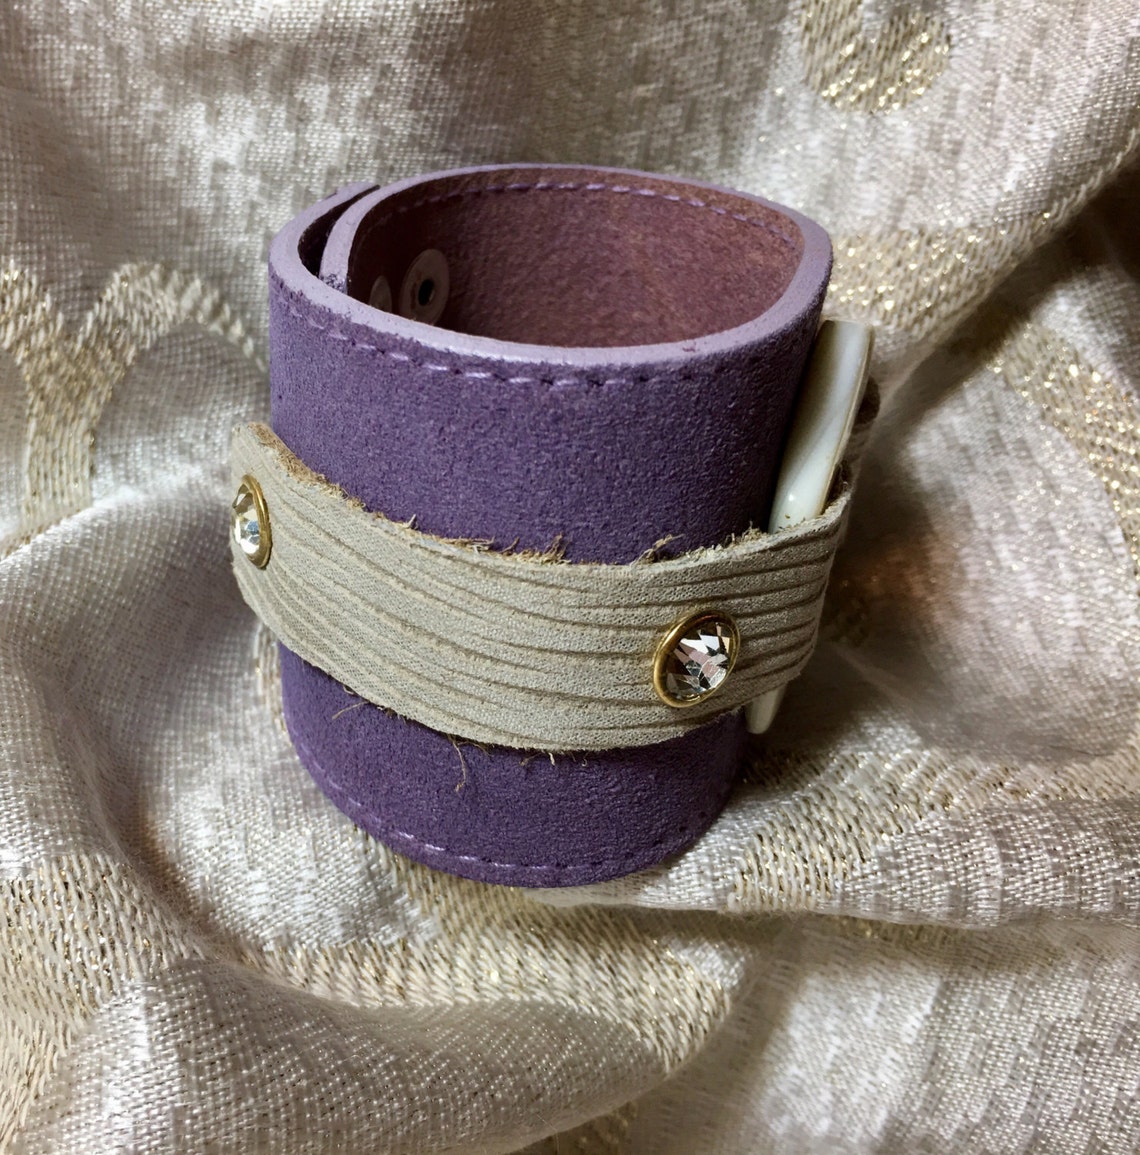 Light Purple Leather Cuff Bracelet Abalone Shell Focal Suede | Etsy